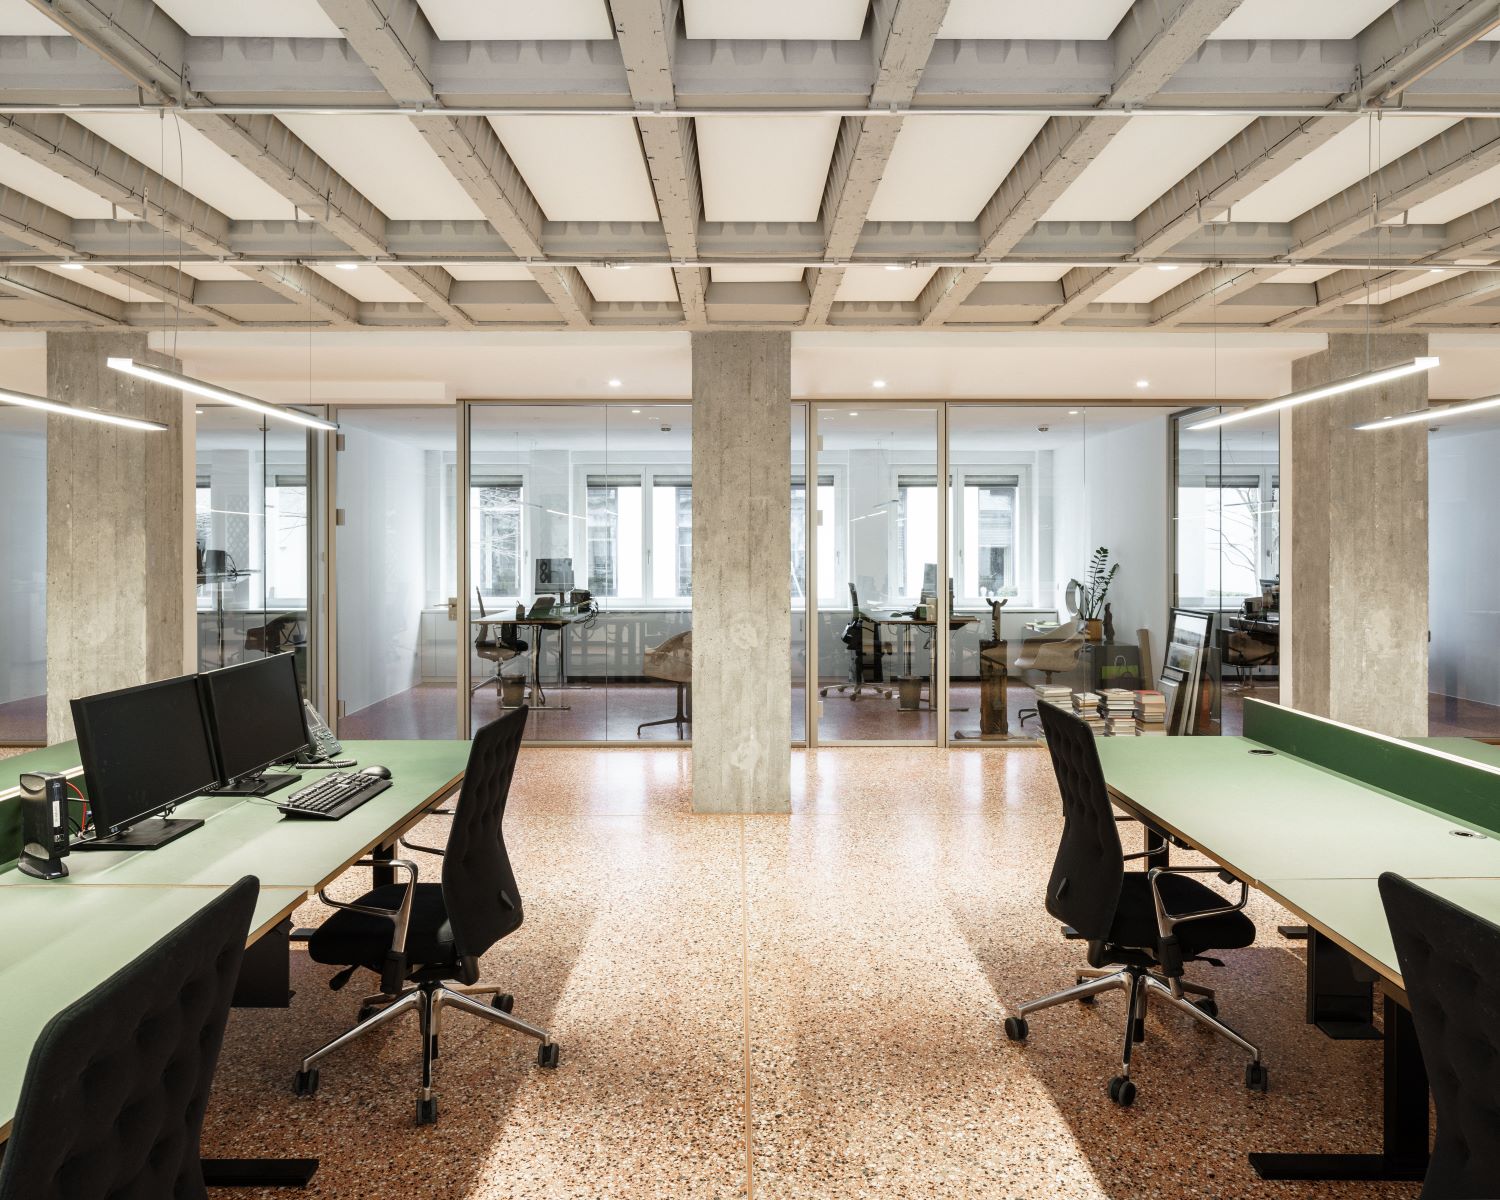 Glass partition, open office, coffered ceiling, furniture linoleum